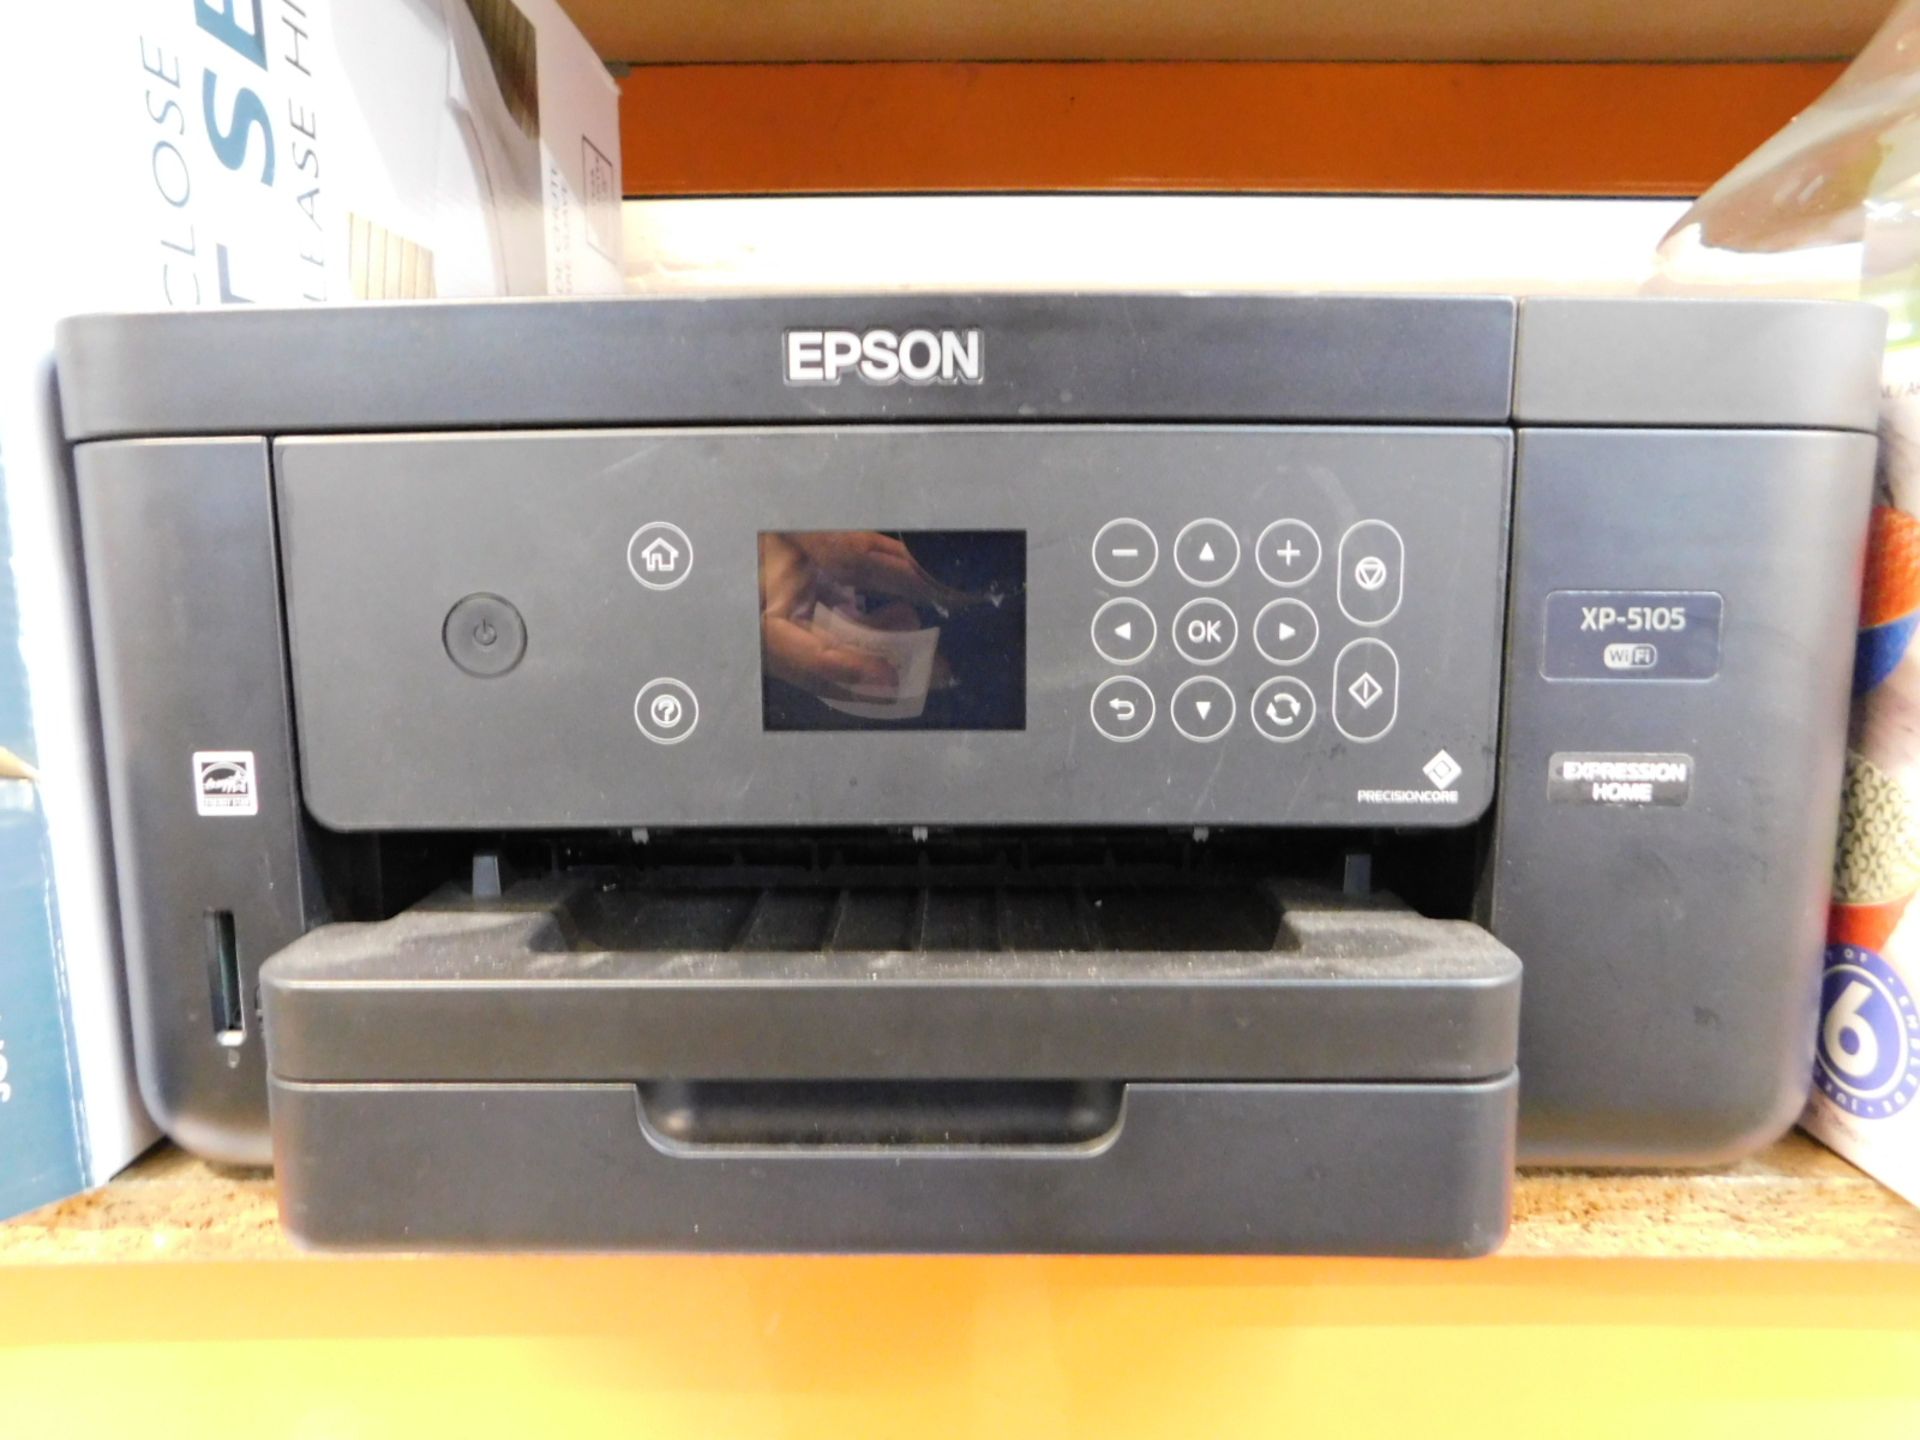 1 EPSON EXPRESSION HOME XP-5105 ALL IN ONE PRINTER RRP Â£199